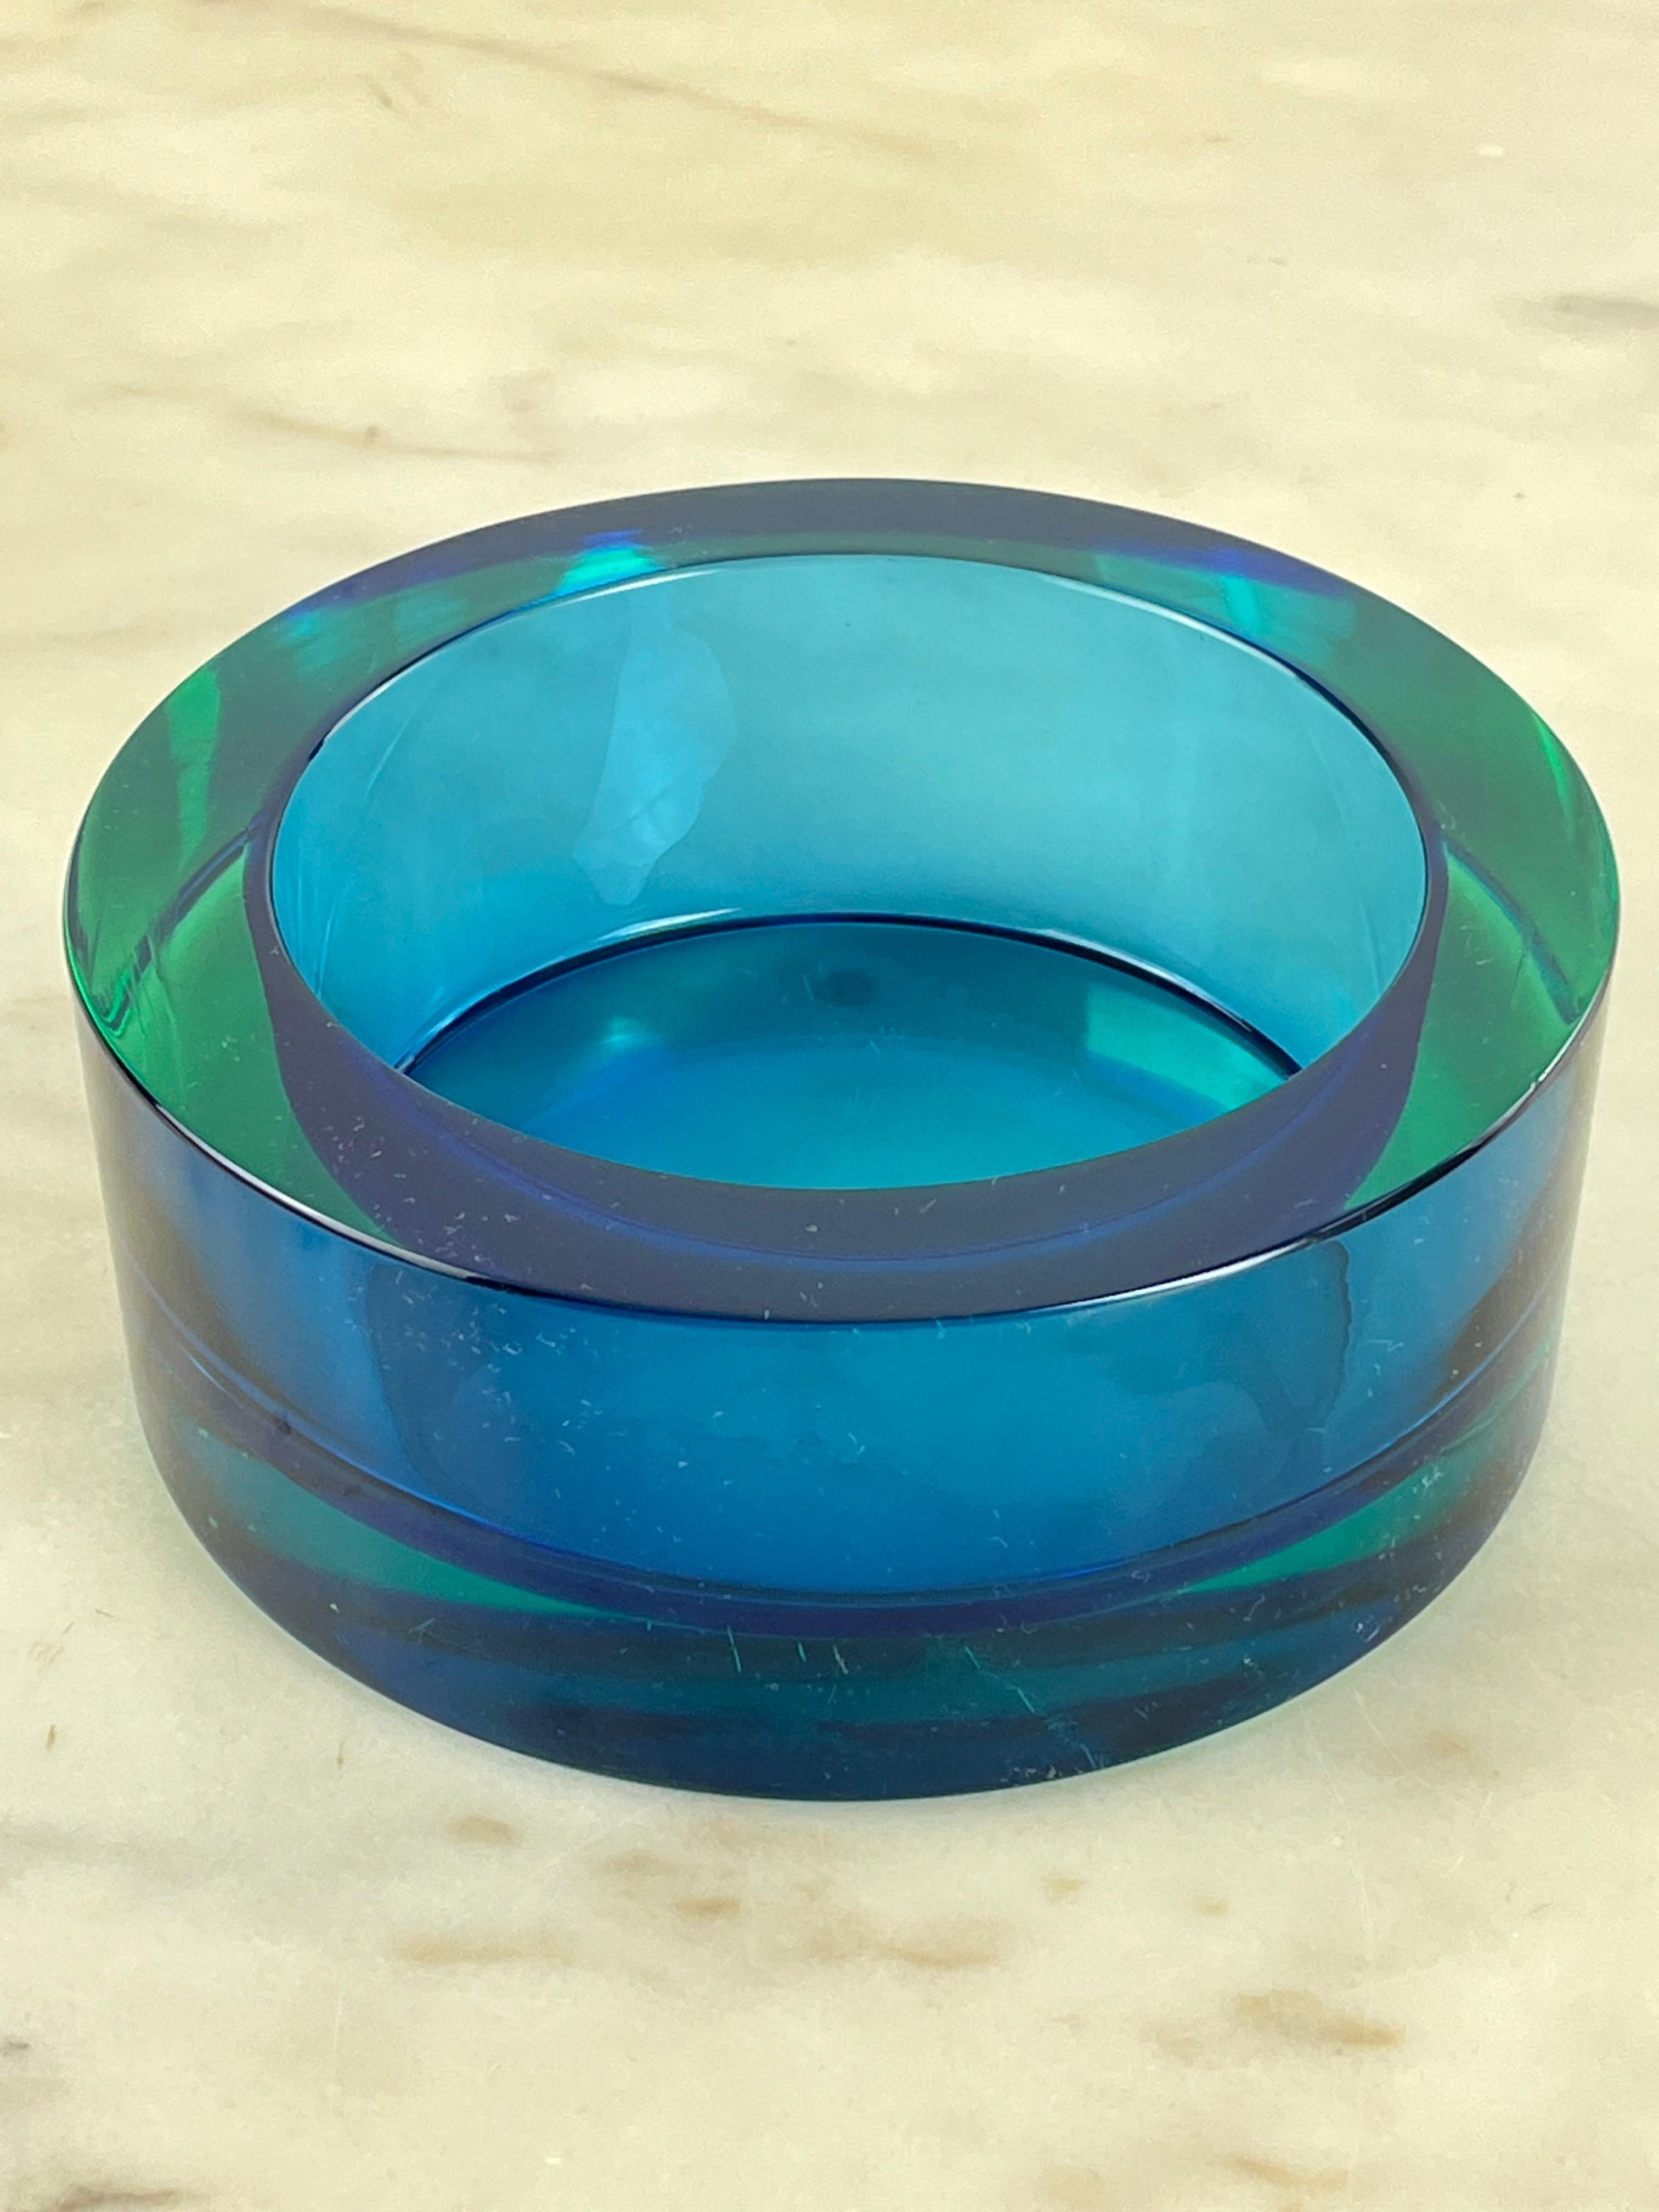 Mid-Century Murano glass pocket tray, 1960s Italian design
Good condition, scratches on the bottom, green and blue colours.
Purchased in Venice in 1962.